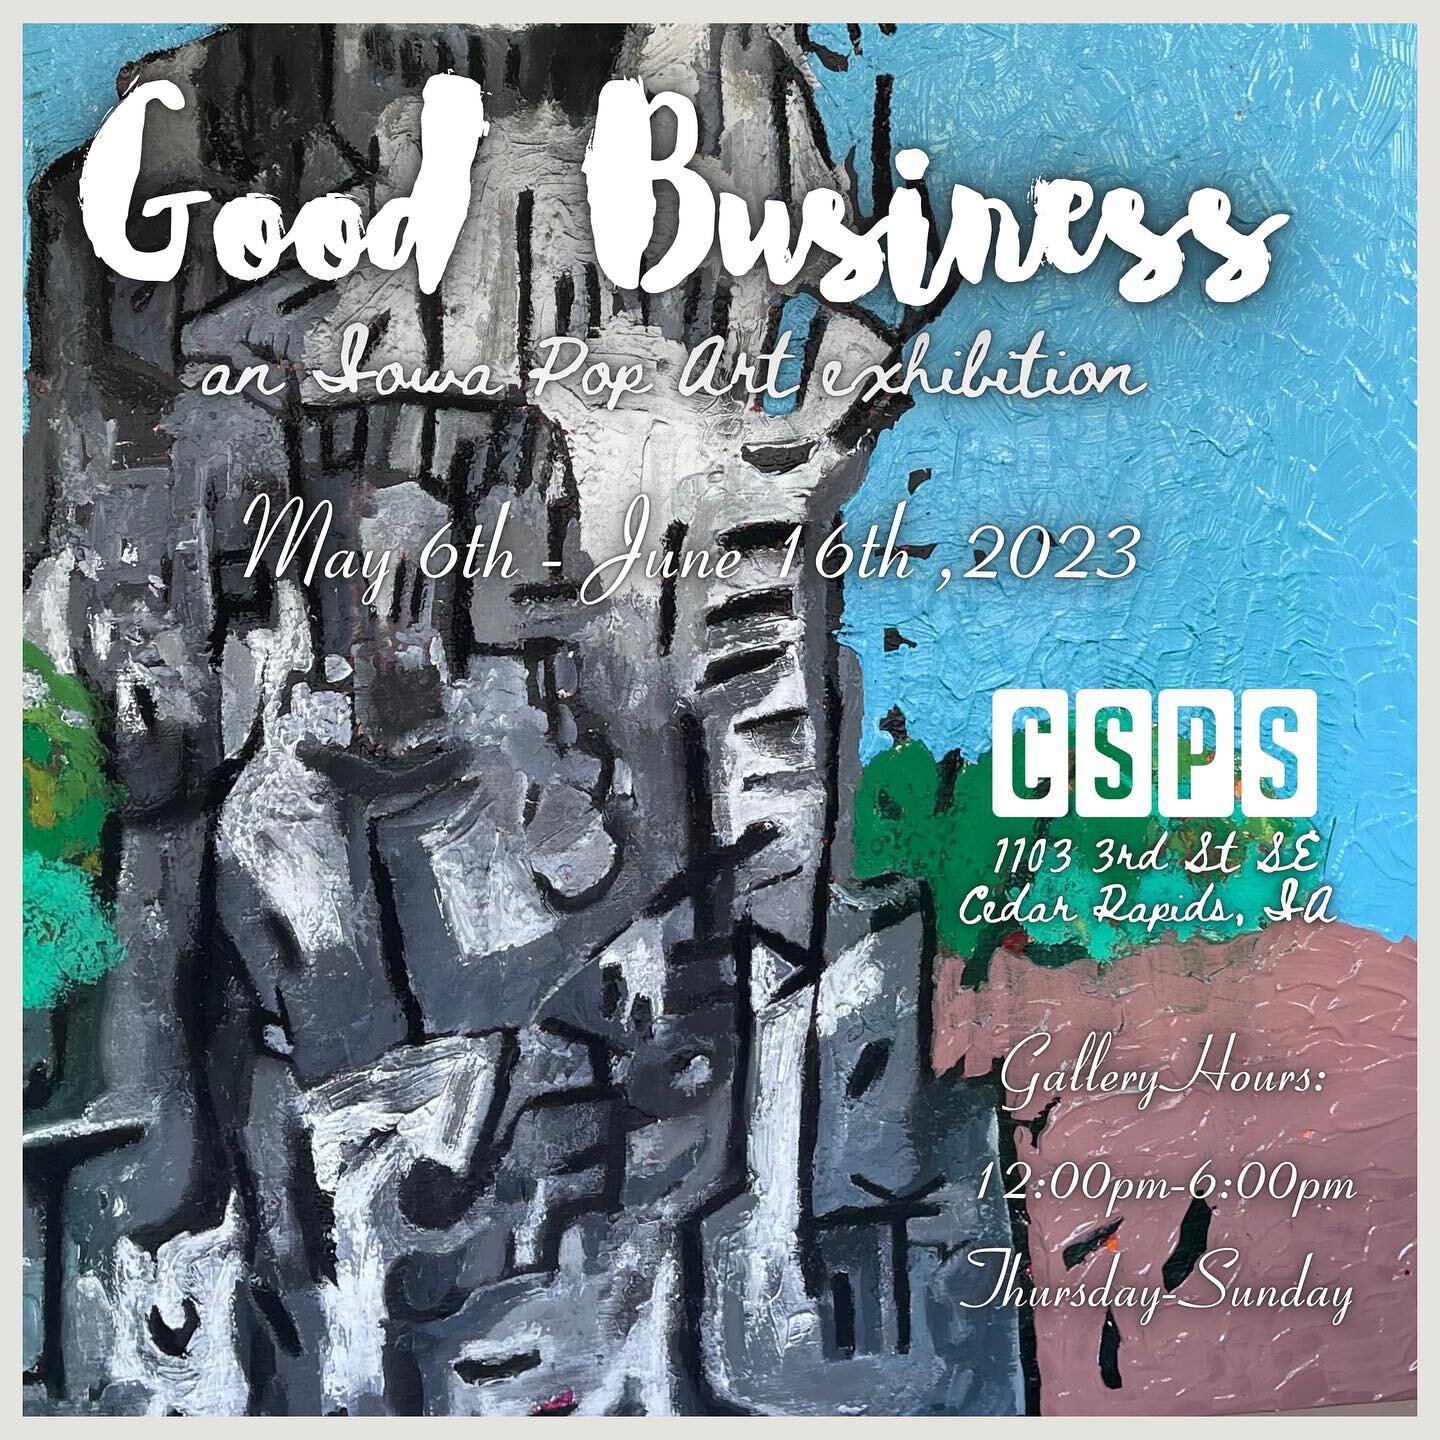 &ldquo;Good Business: an Iowa Pop Art exhibition&rdquo; at the historic CSPS Hall (@cspshall) continues through June 16th, 2023. Gallery hours are Thursday-Sunday 12:00pm-6:00pm. 

&ldquo;Being good in business is the most fascinating kind of art. Ma